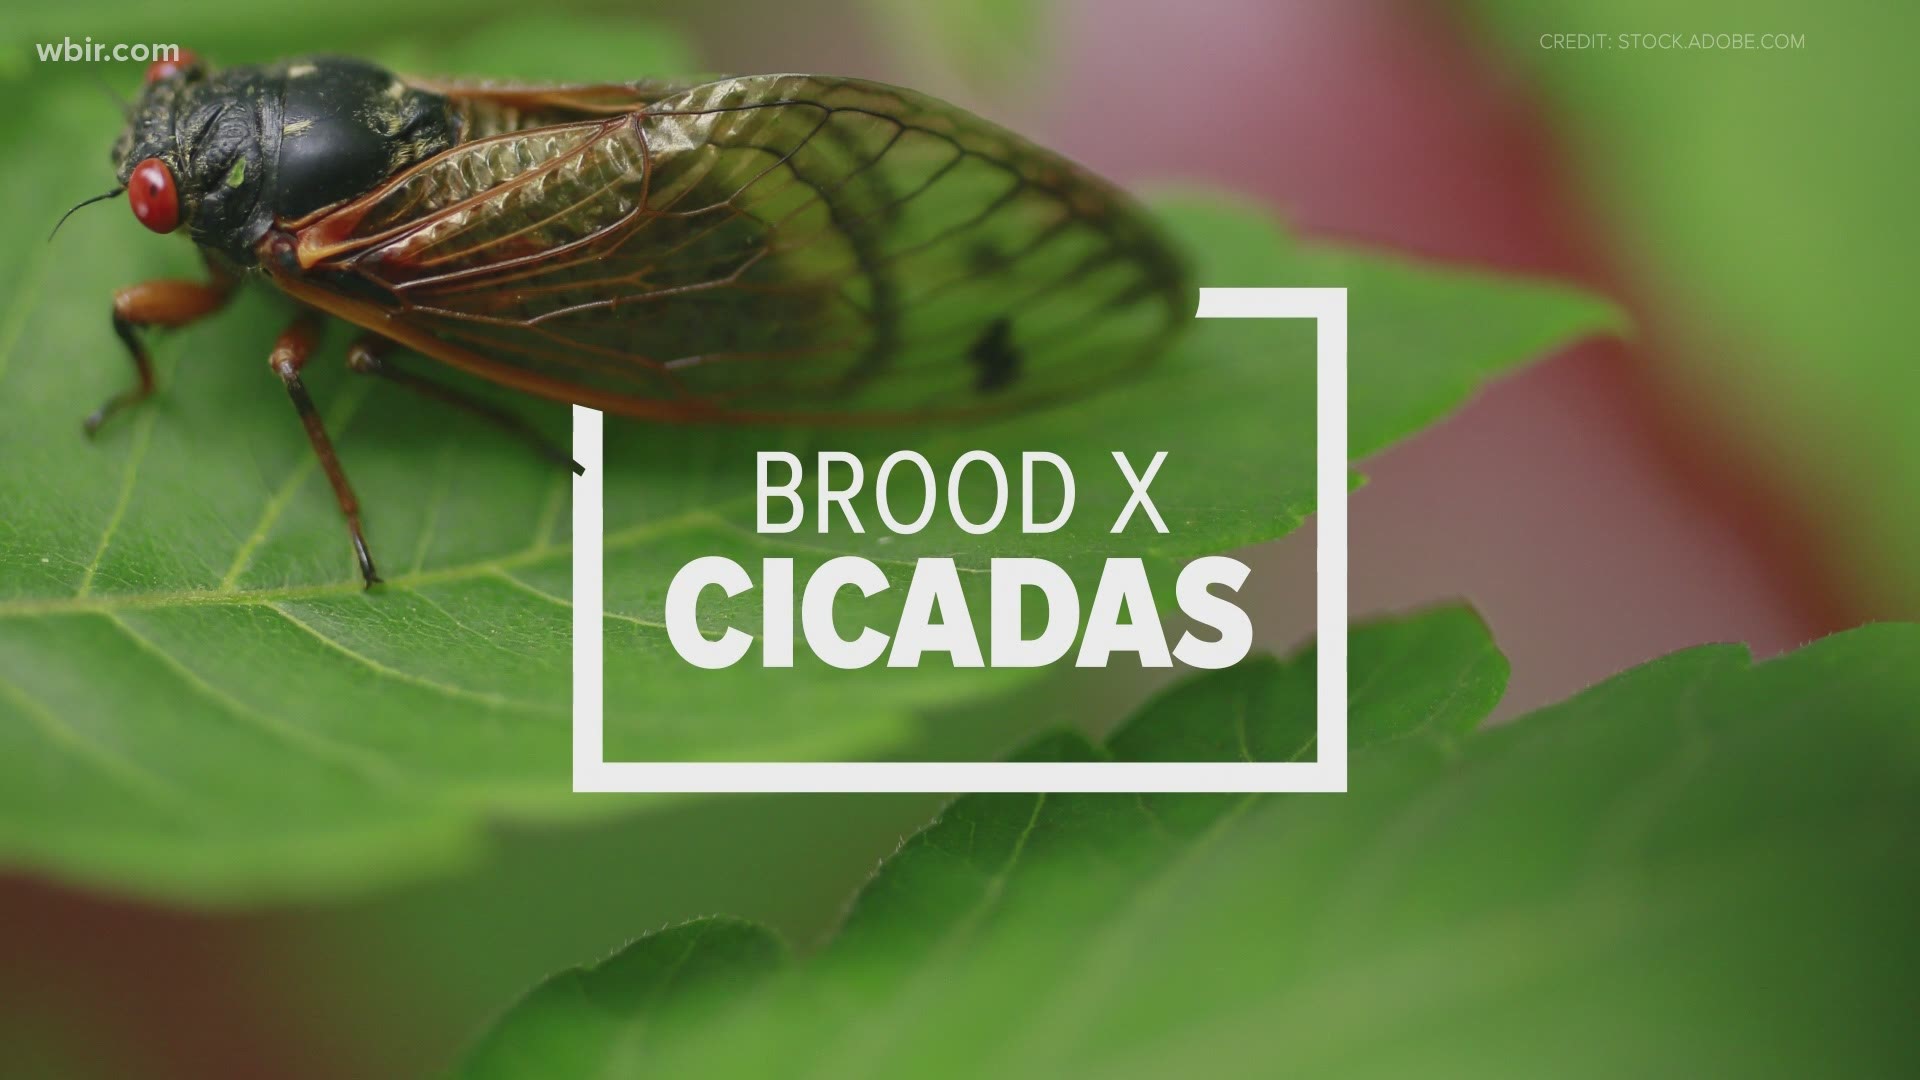 Soon, East Tennessee will be covered in cicadas. 
Your neighborhood will both look and sound very different.